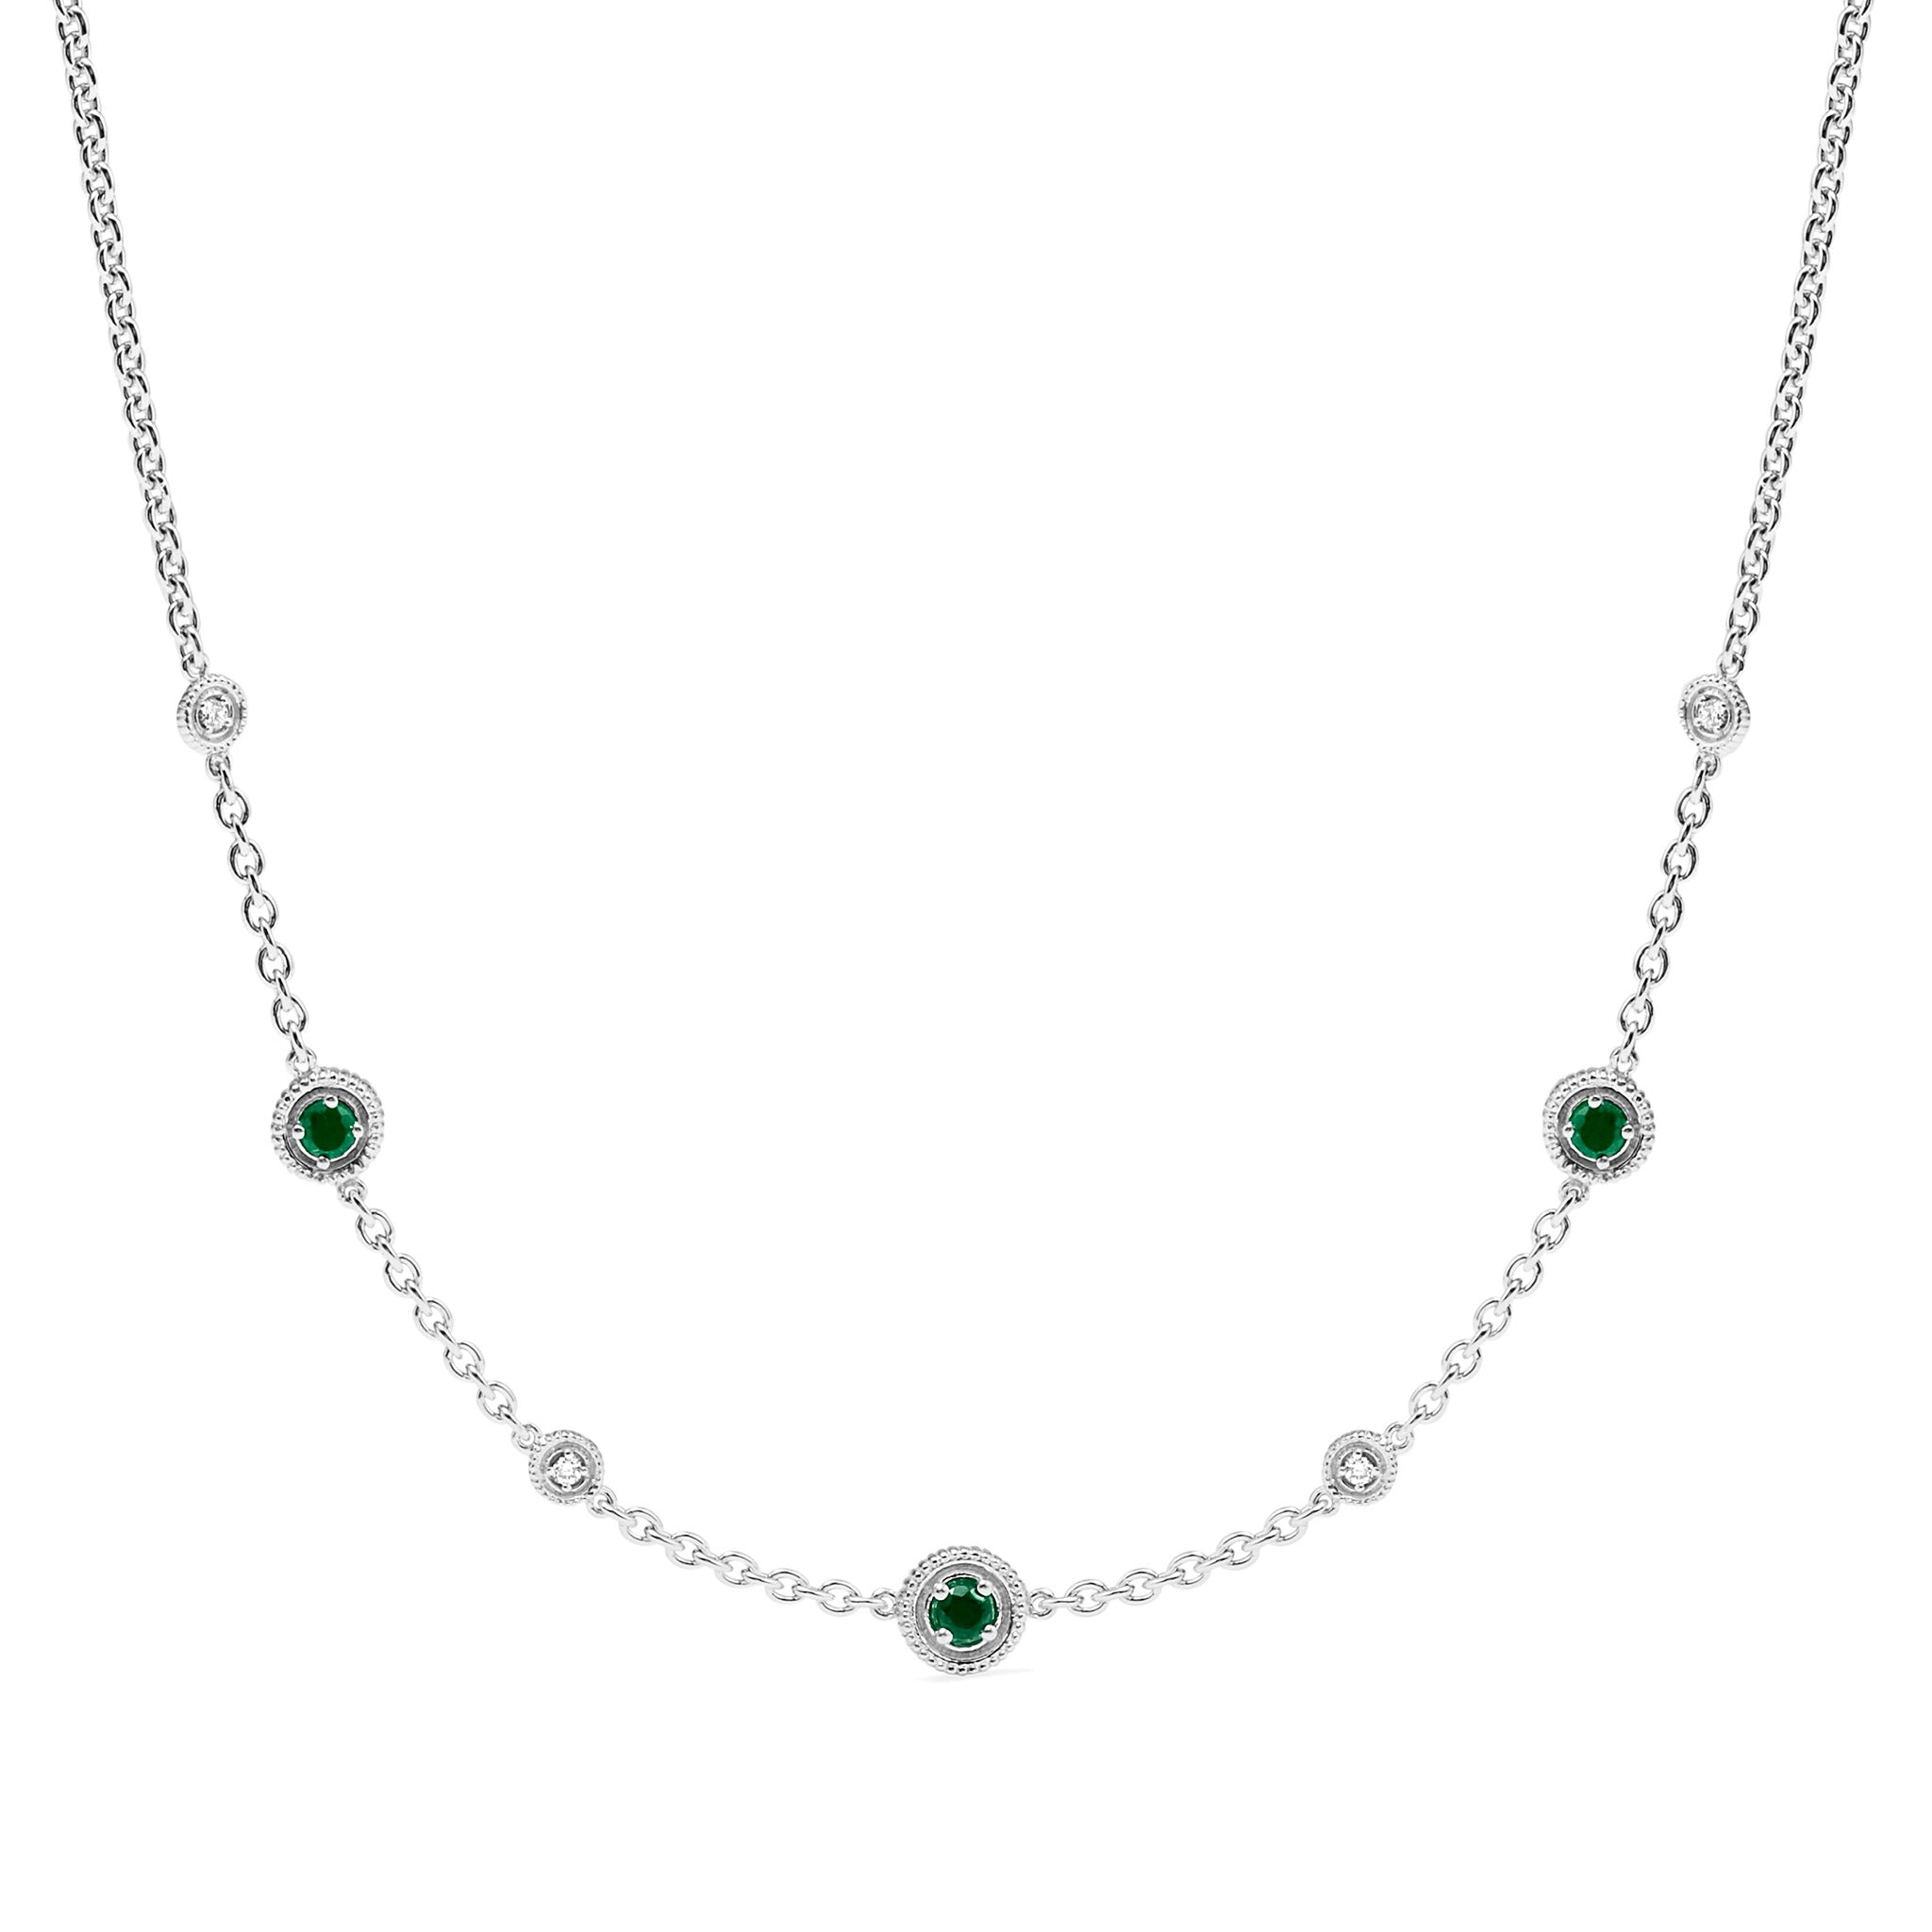 Max Station Necklace with Emerald and Diamonds